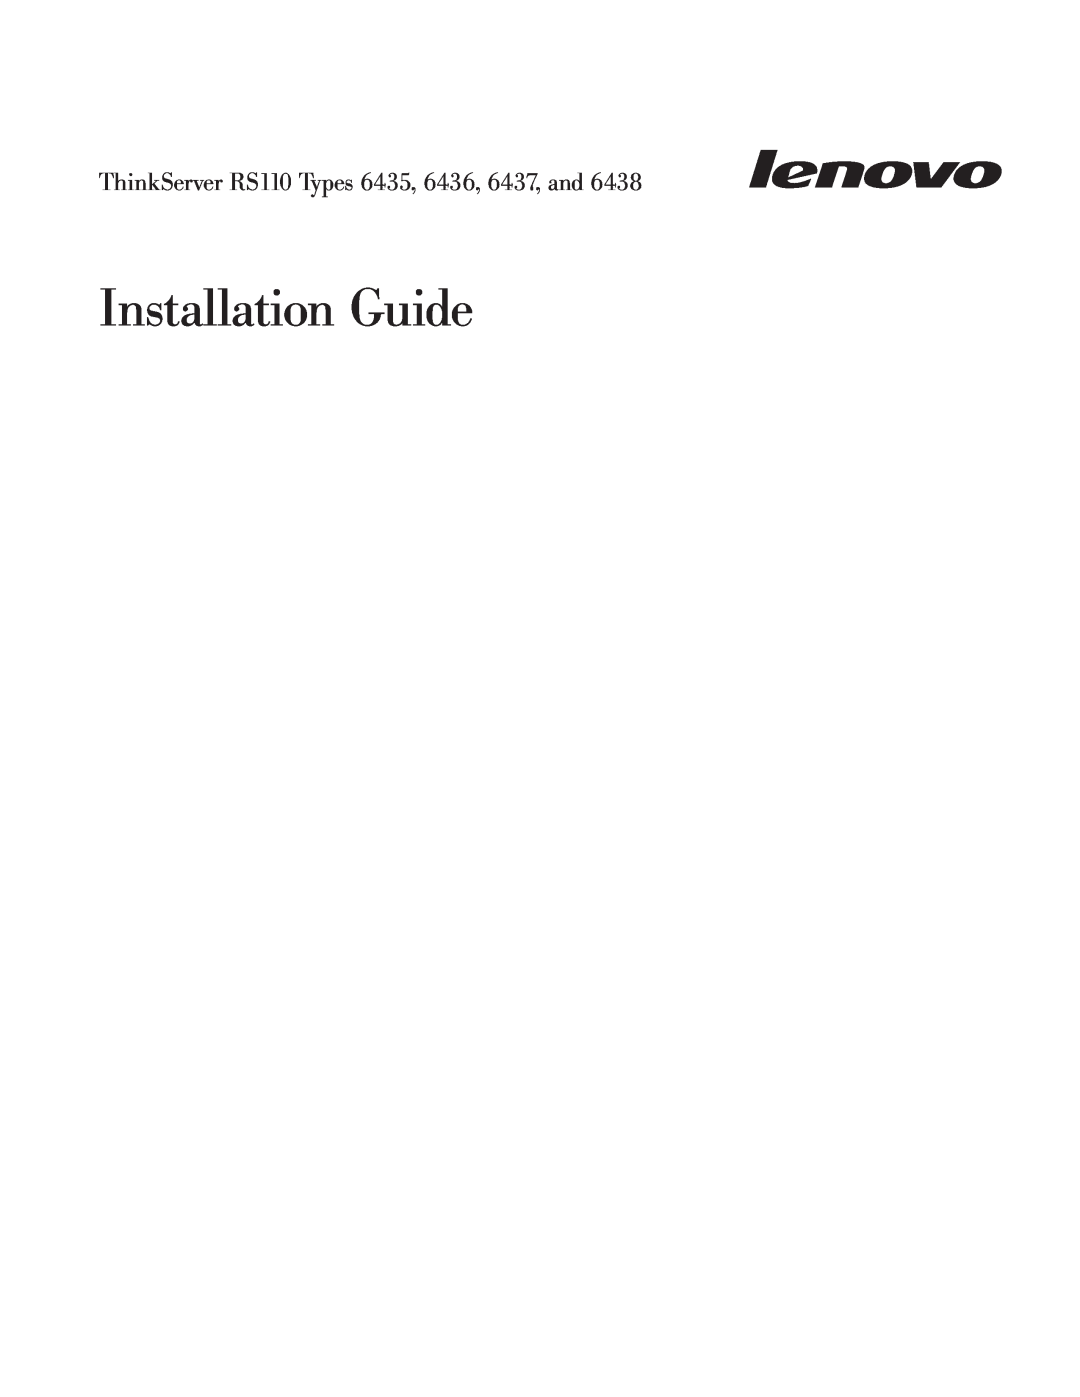 Lenovo 6438 manual Installation Guide, ThinkServer RS110 Types 6435, 6436, 6437, and 